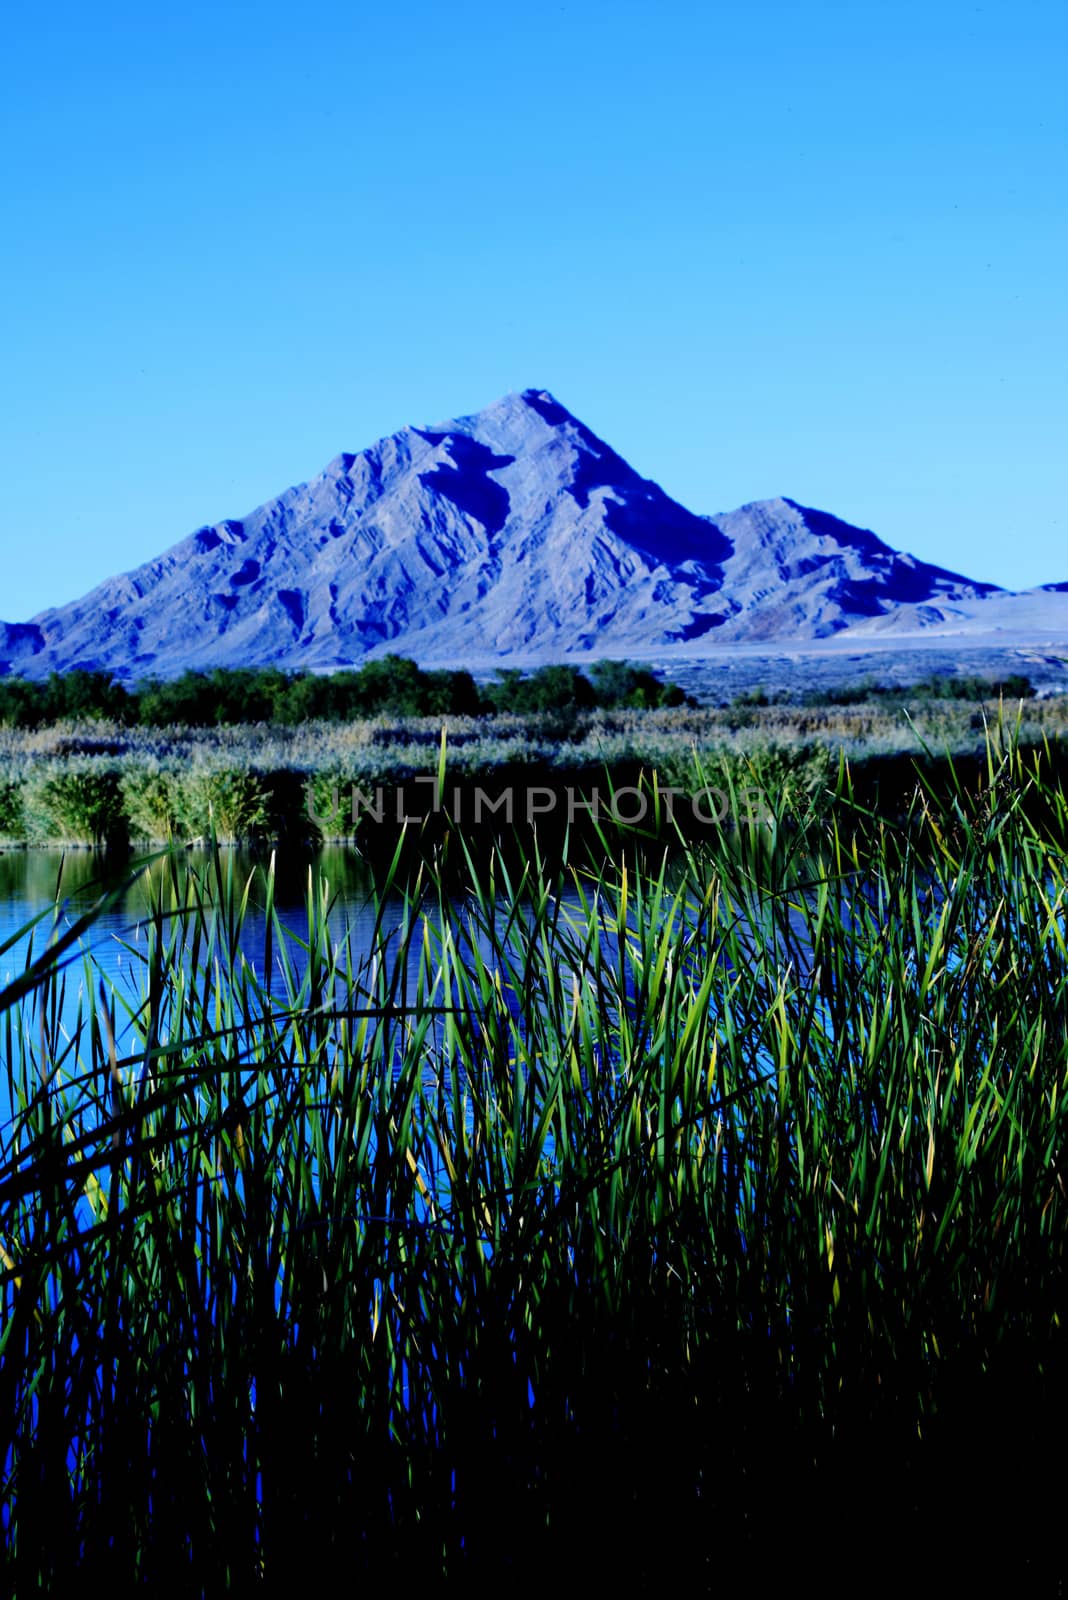 The Clark County Wetlands Park is the largest park in the Clark County, Nevada park system. The park is located on the east side of the Las Vegas valley.